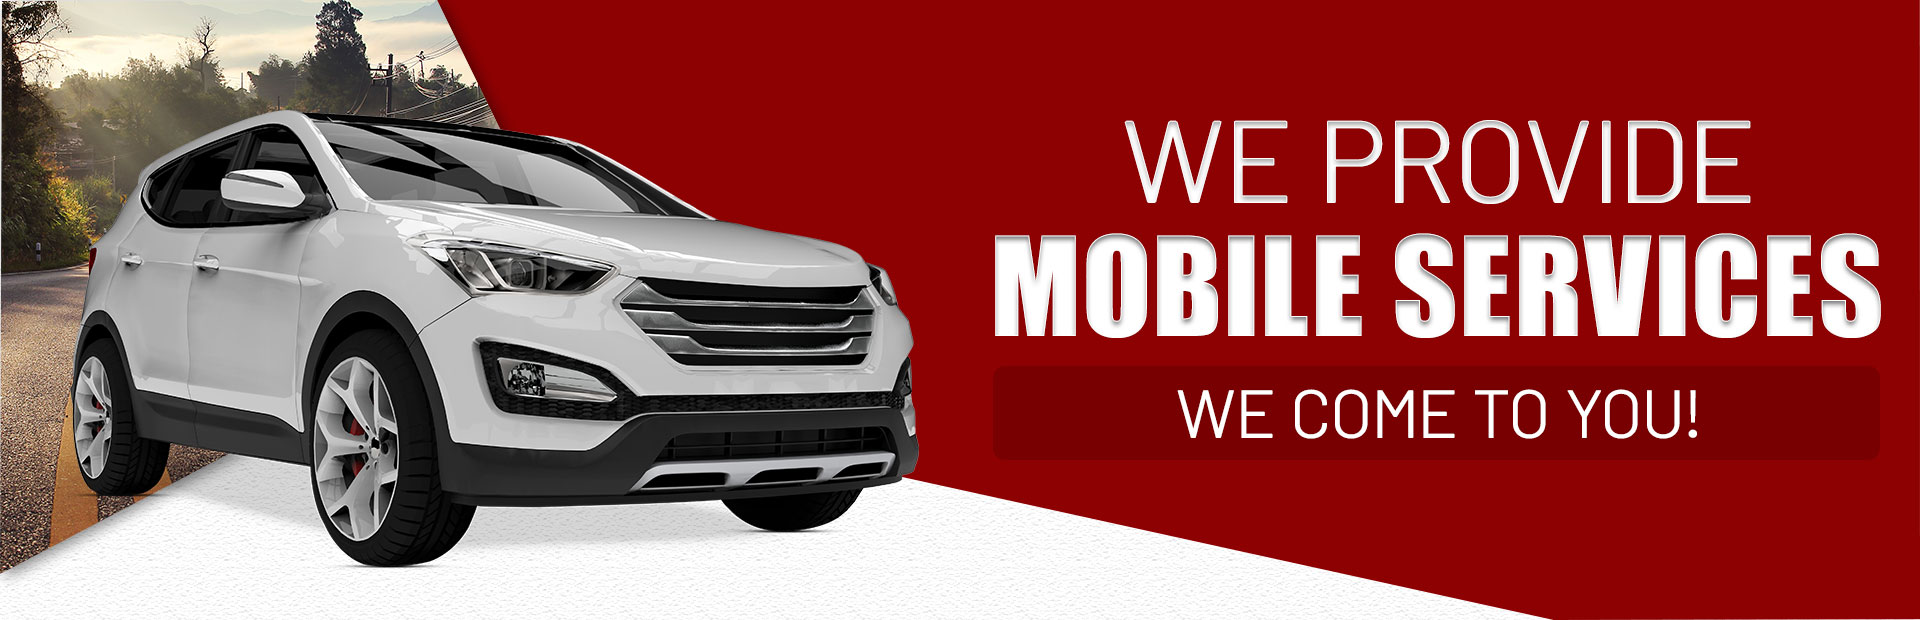 We Provide Mobile Services